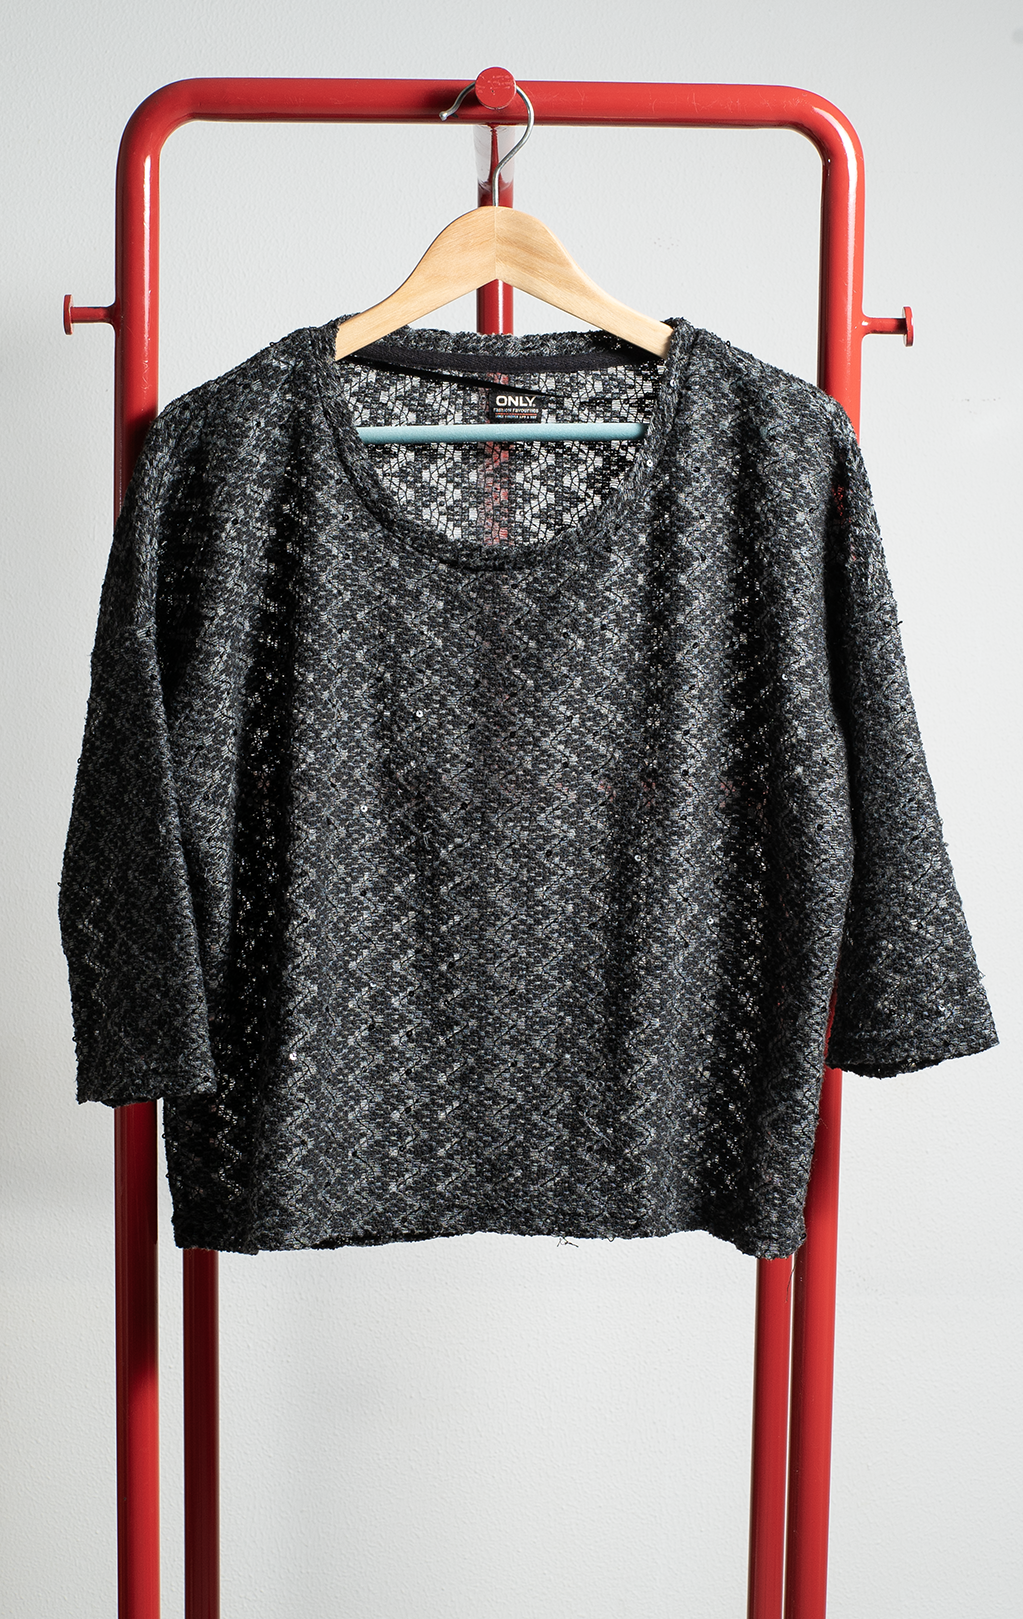 ONLY SWEATER - Grey zigzag pattern with paillette - Medium